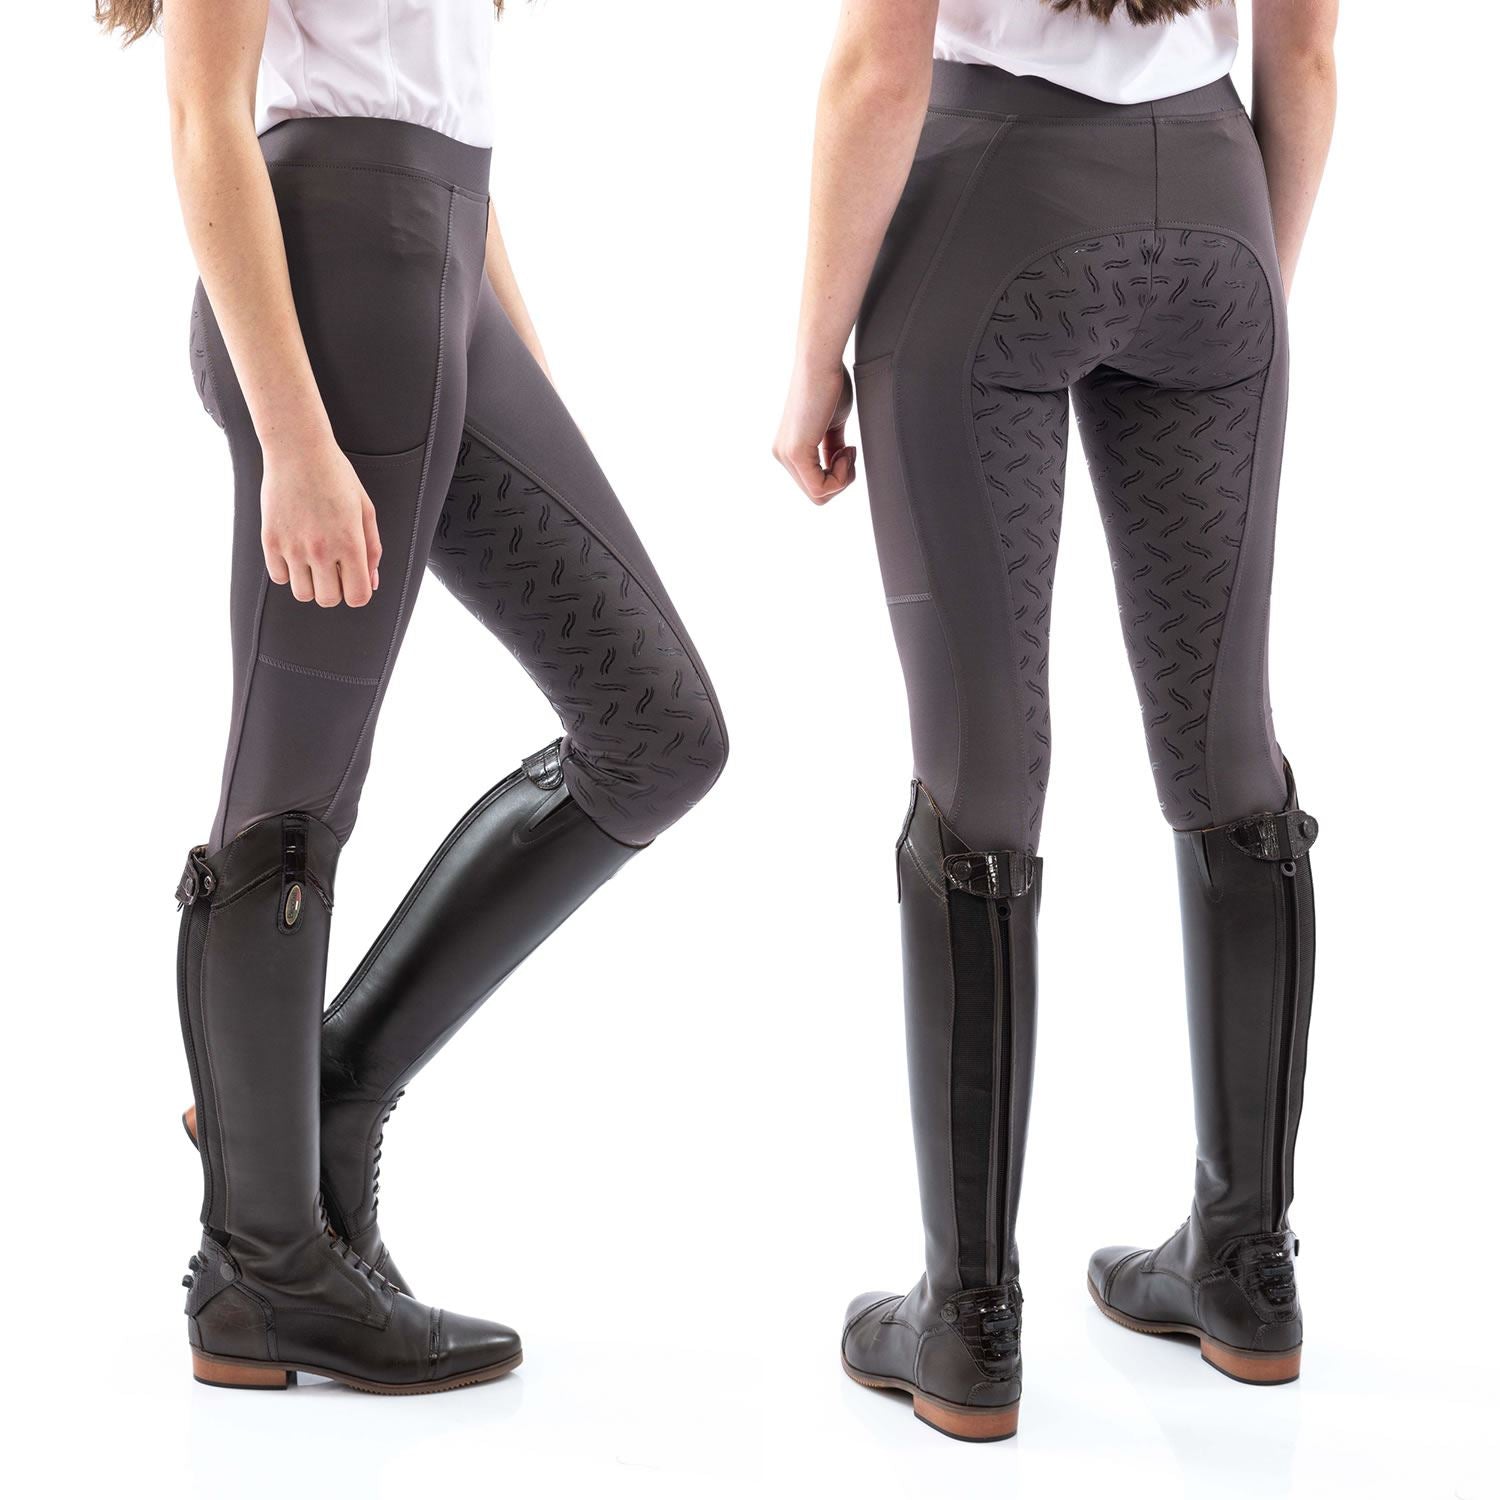 Whitaker Shore Riding Tights - Just Horse Riders